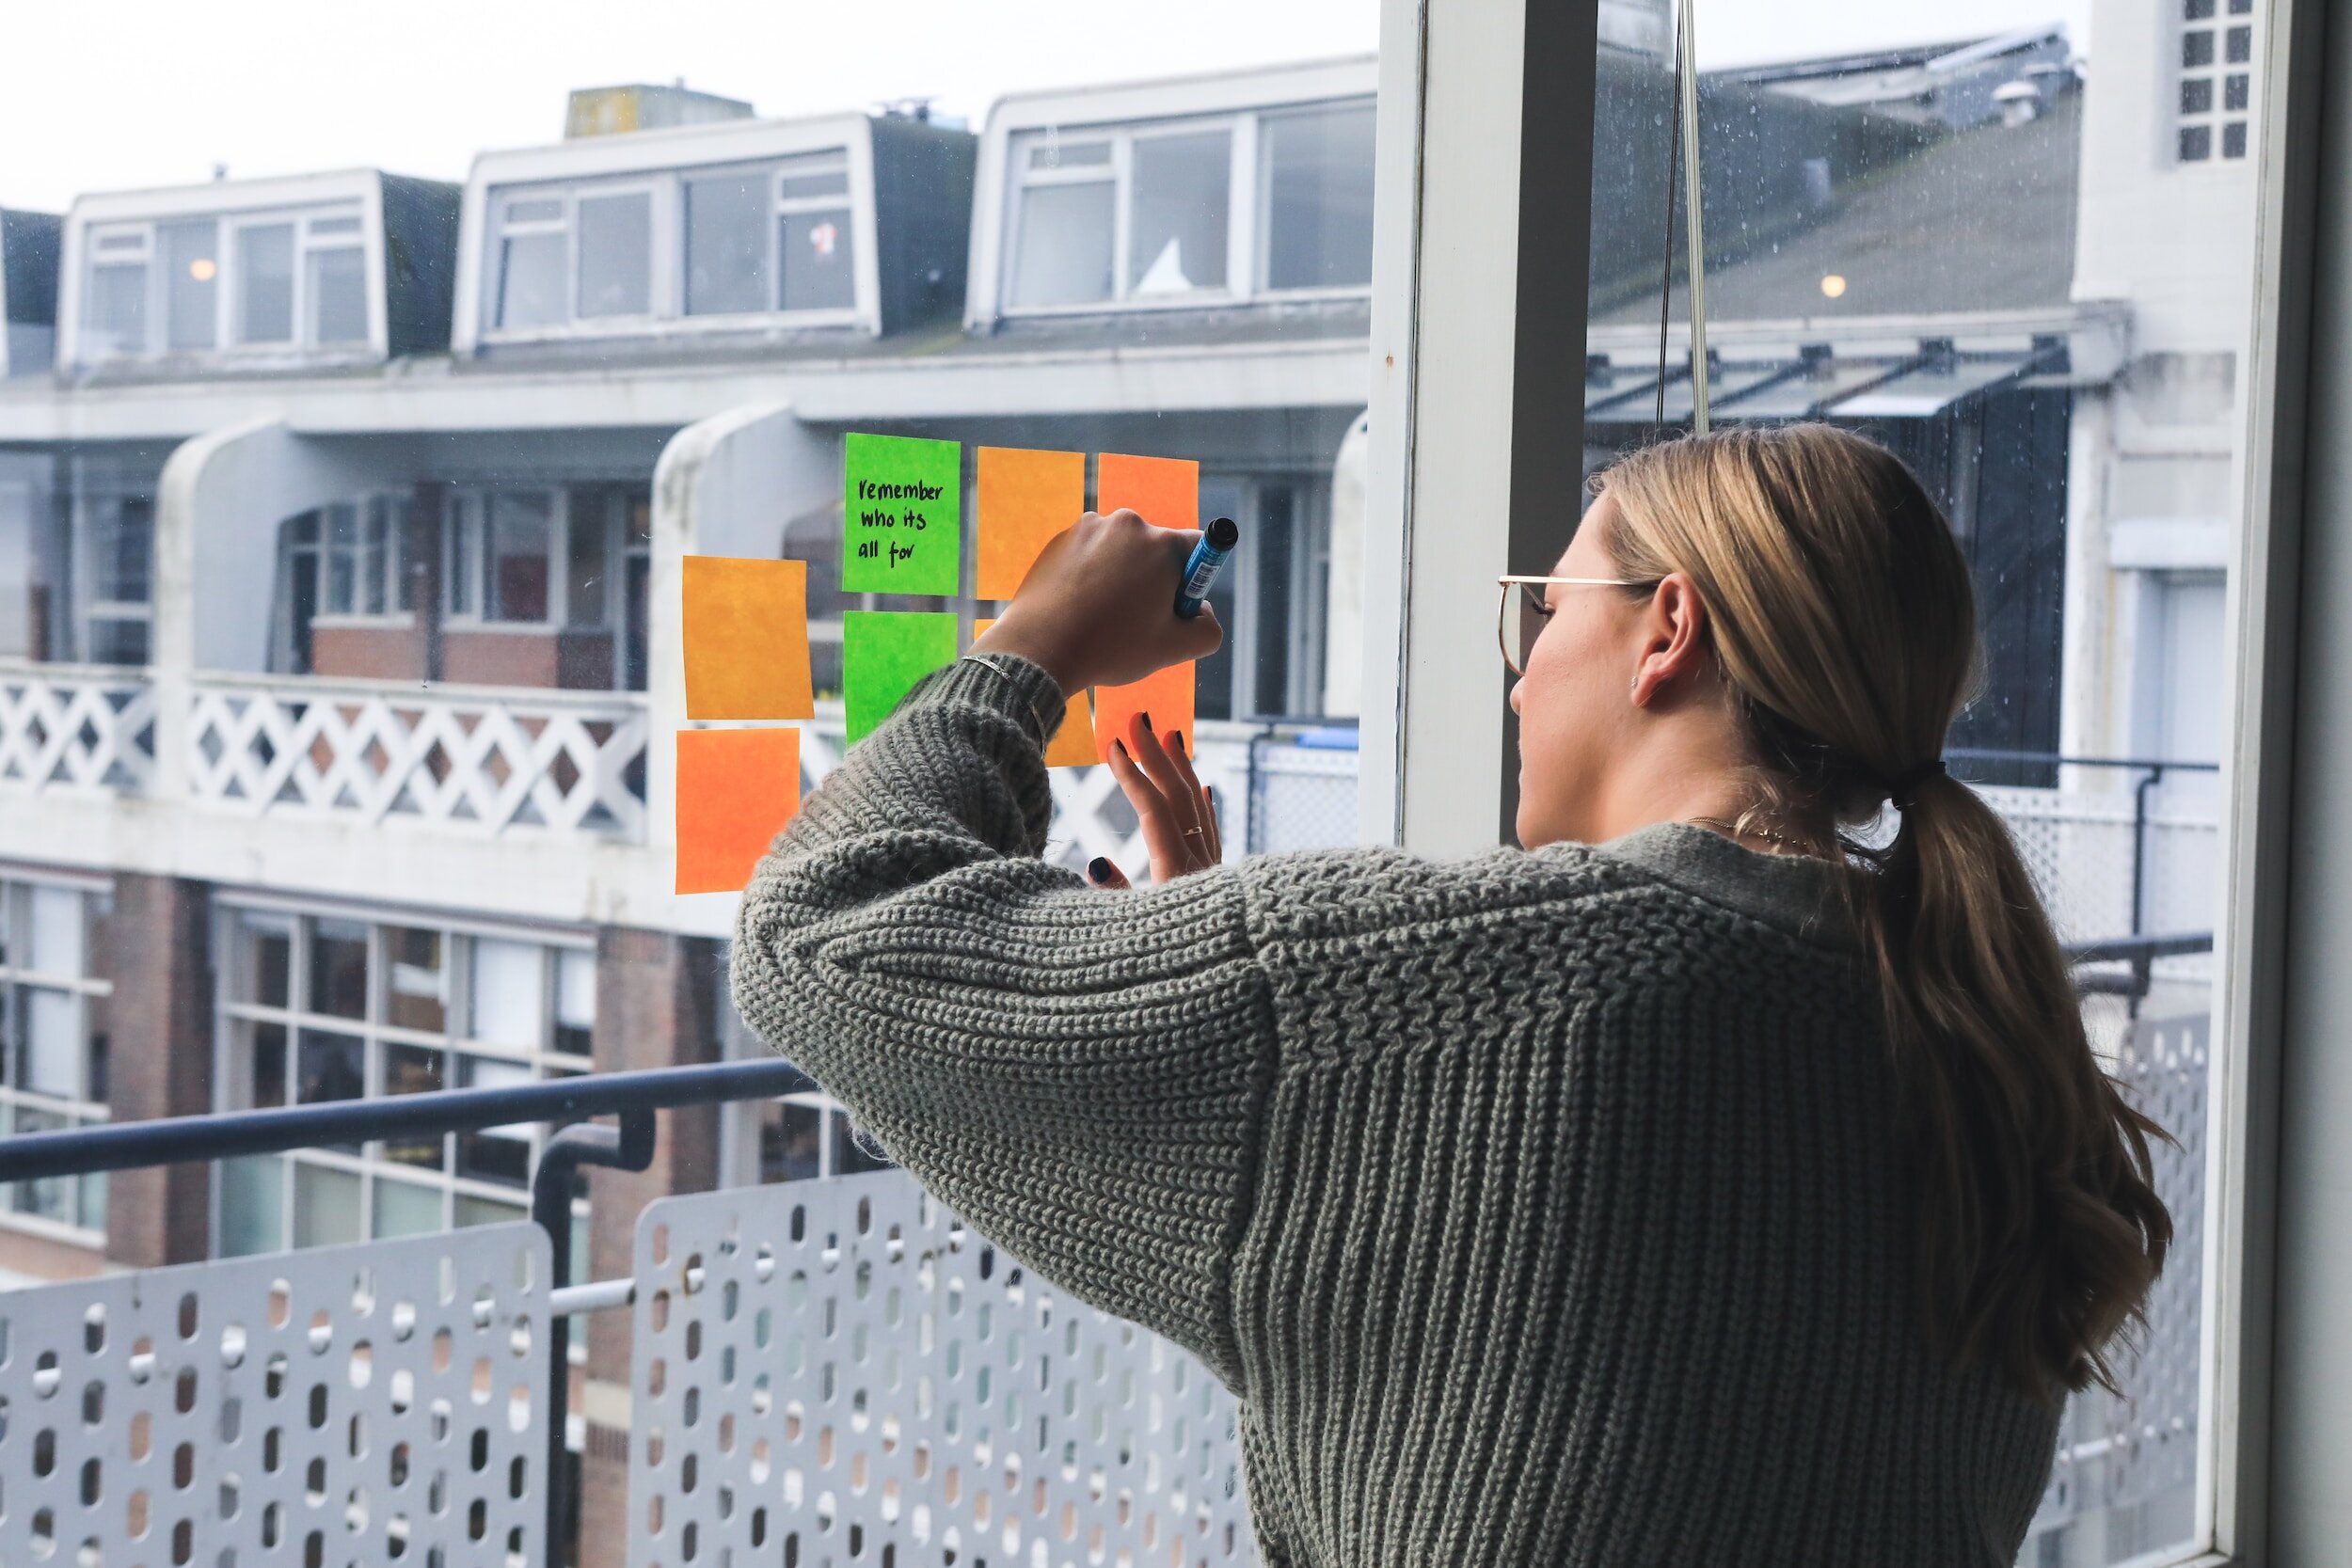 With colourful post-it notes stuck to the window, a woman begins to generate ideas.